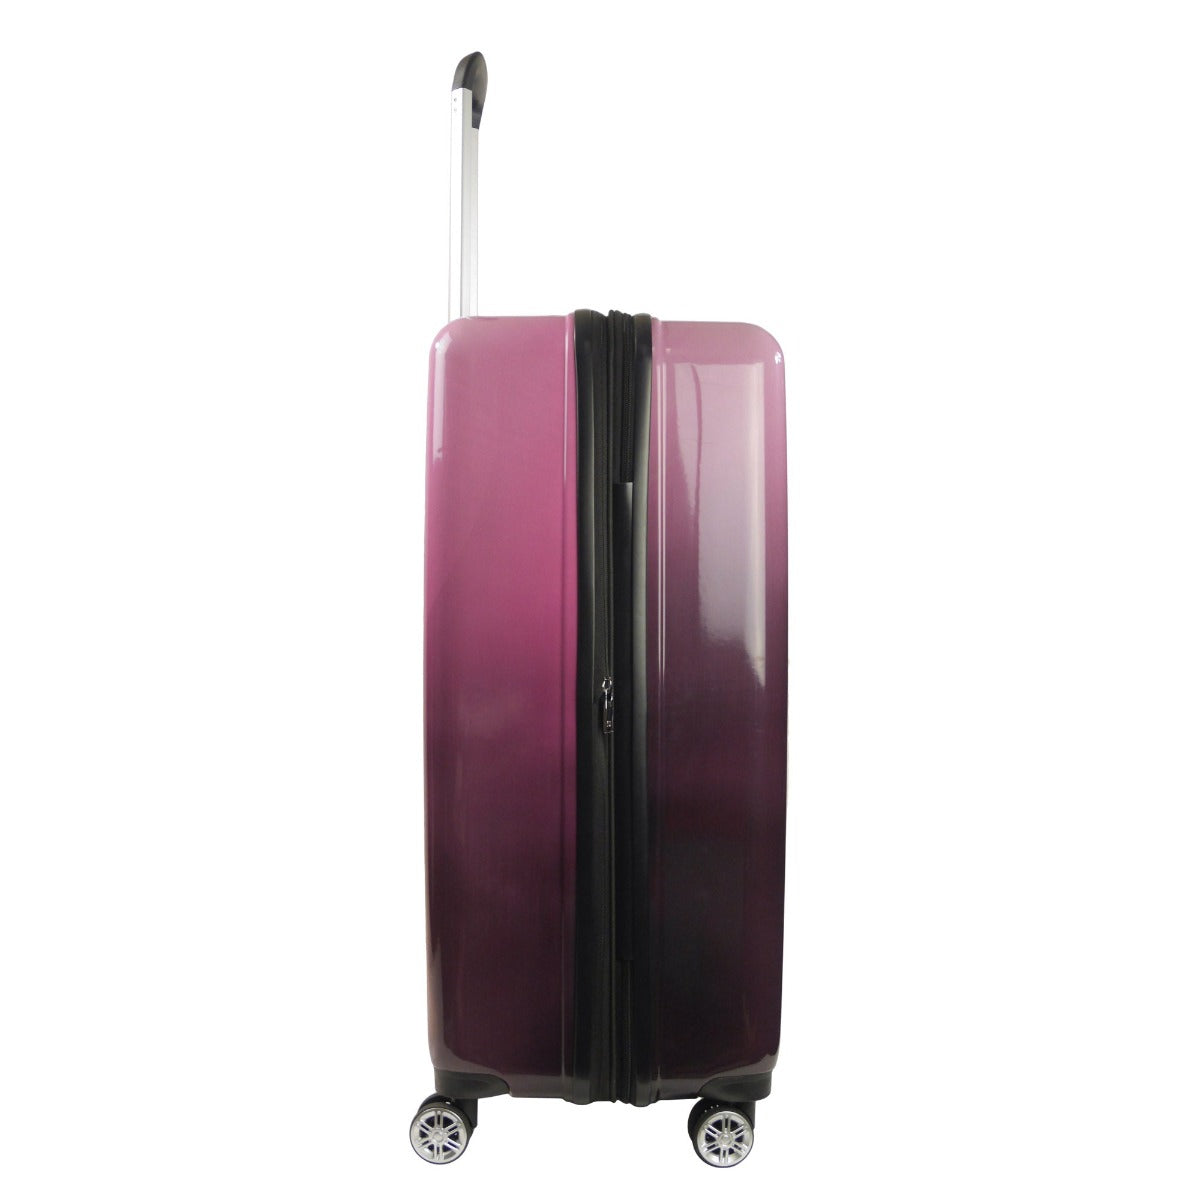 Ful Impulse Ombre Hardside Spinner Suitcase 31" Checked Luggage Pink Purple Fade 360° spinner wheels 2 inch expansion zipper pocket